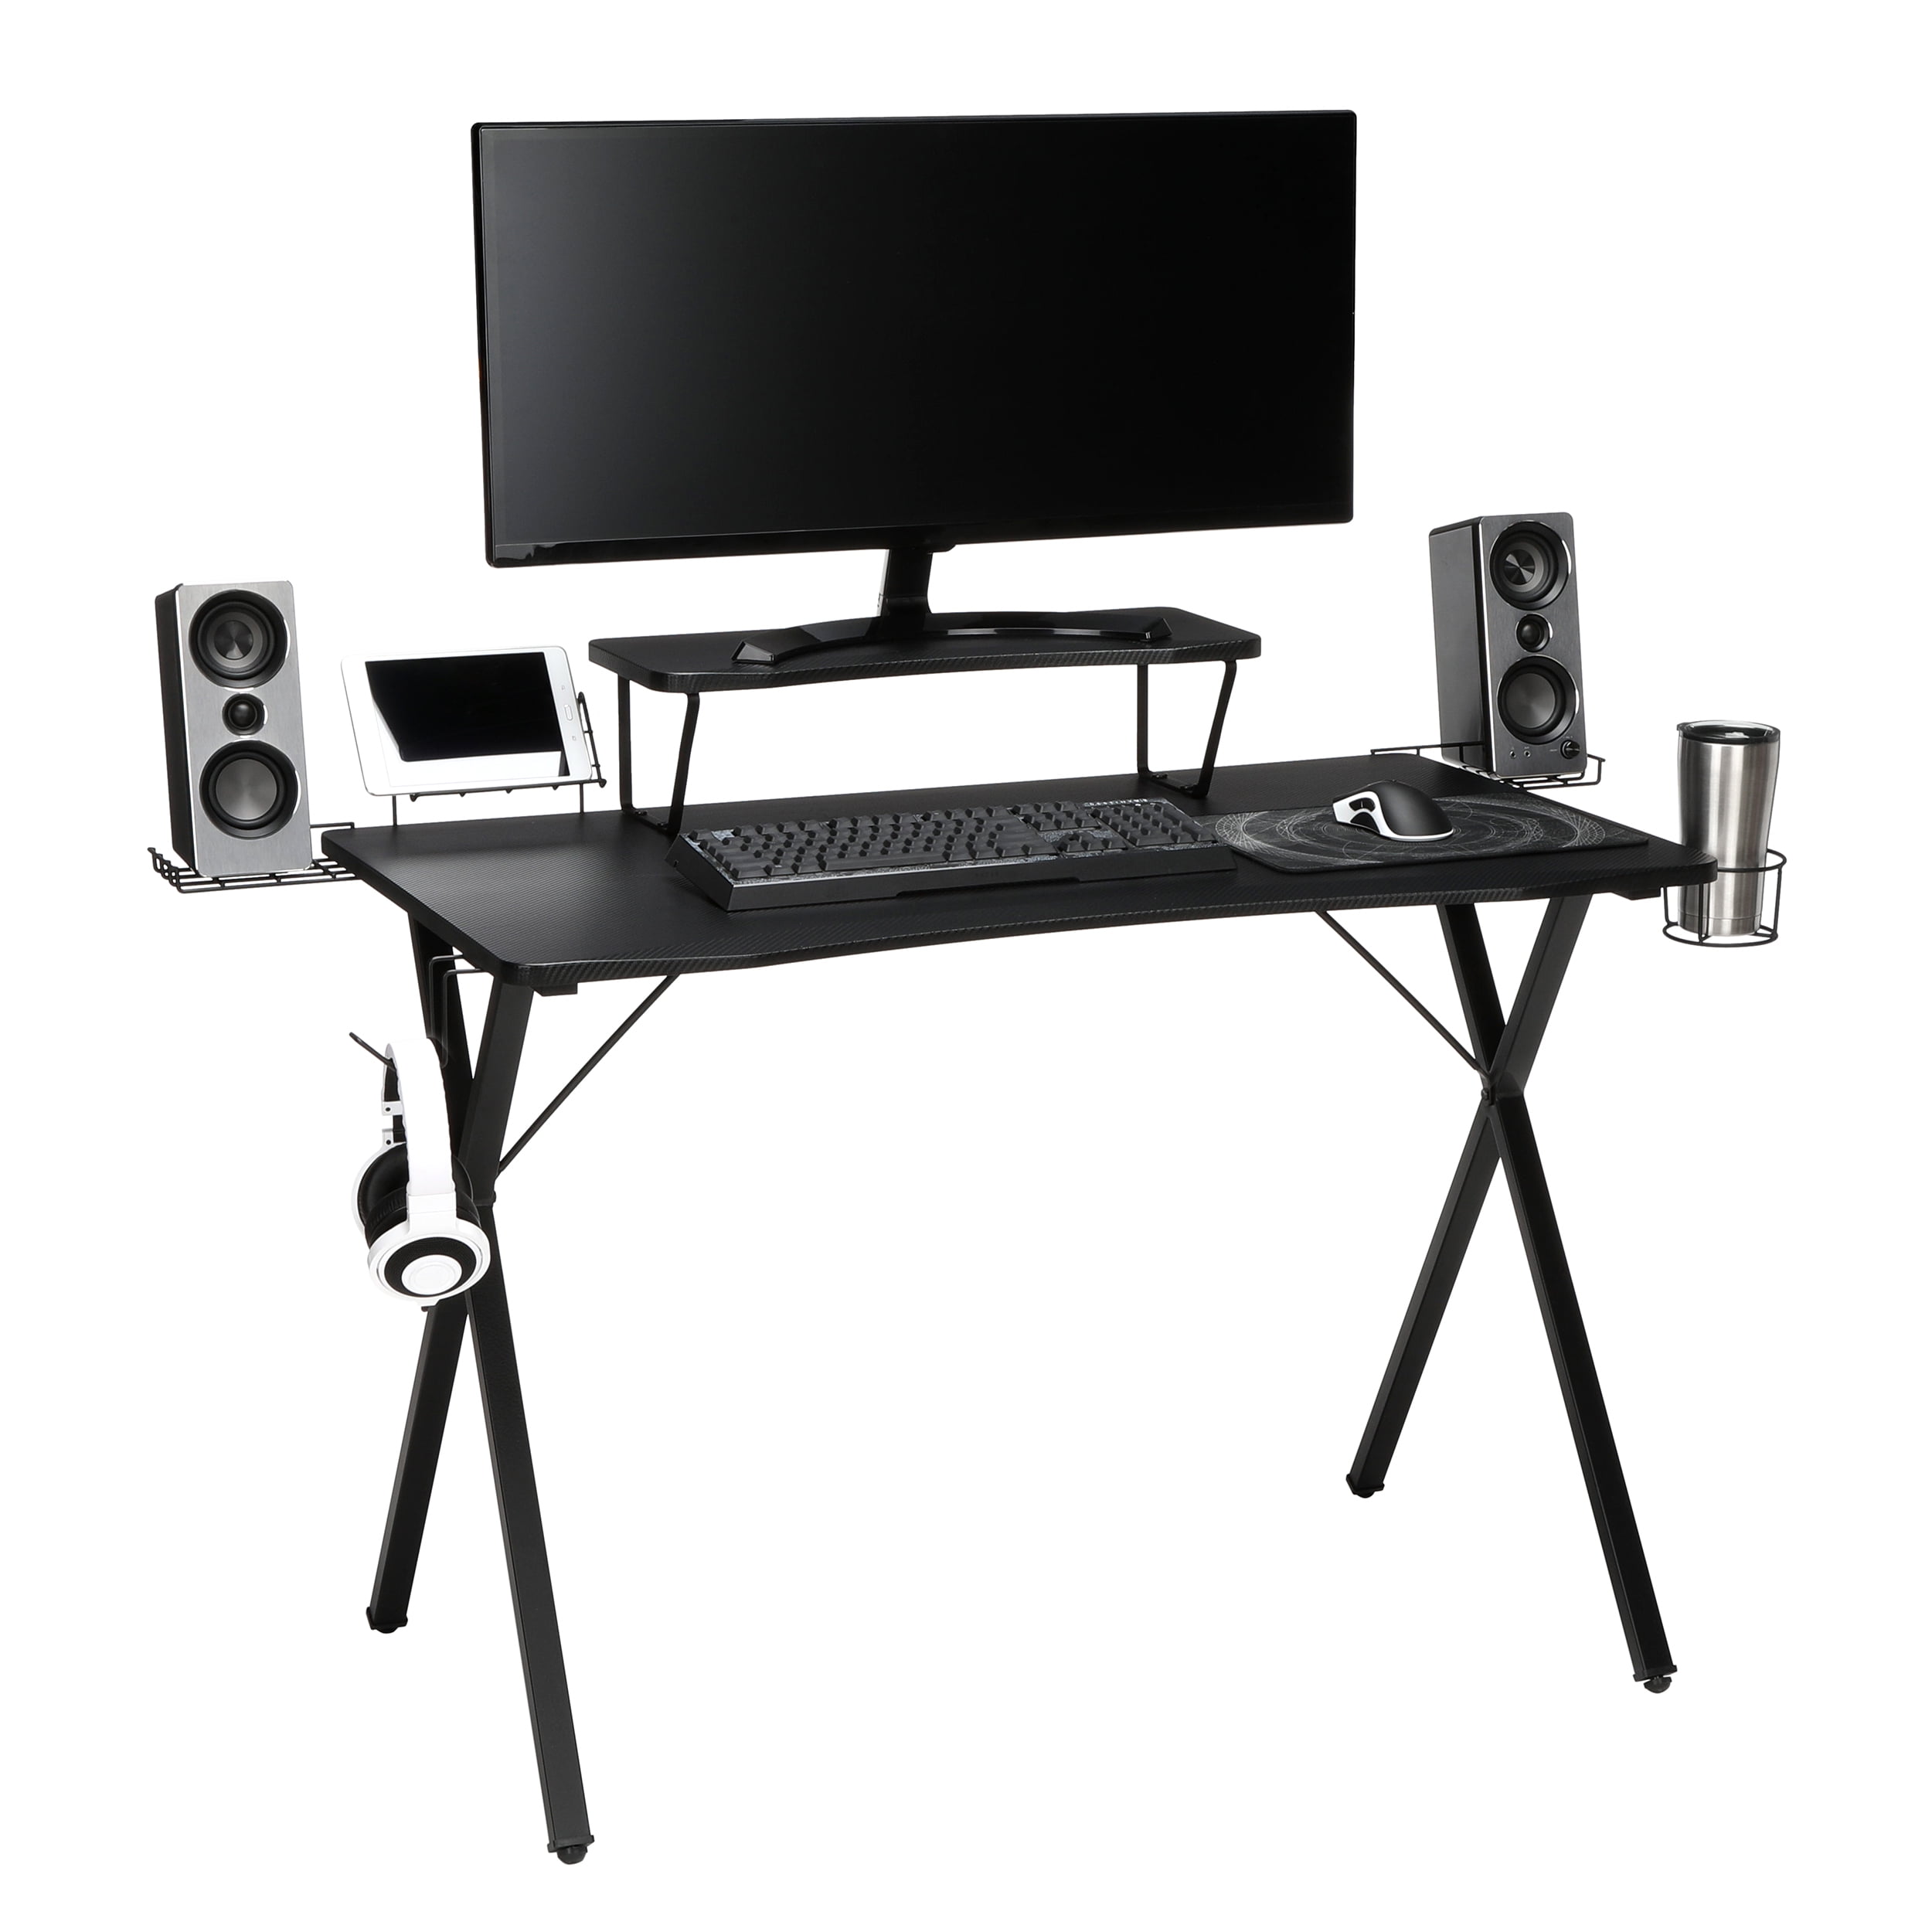 14 Gaming Desk Accessories You Need to Reach Battlestation